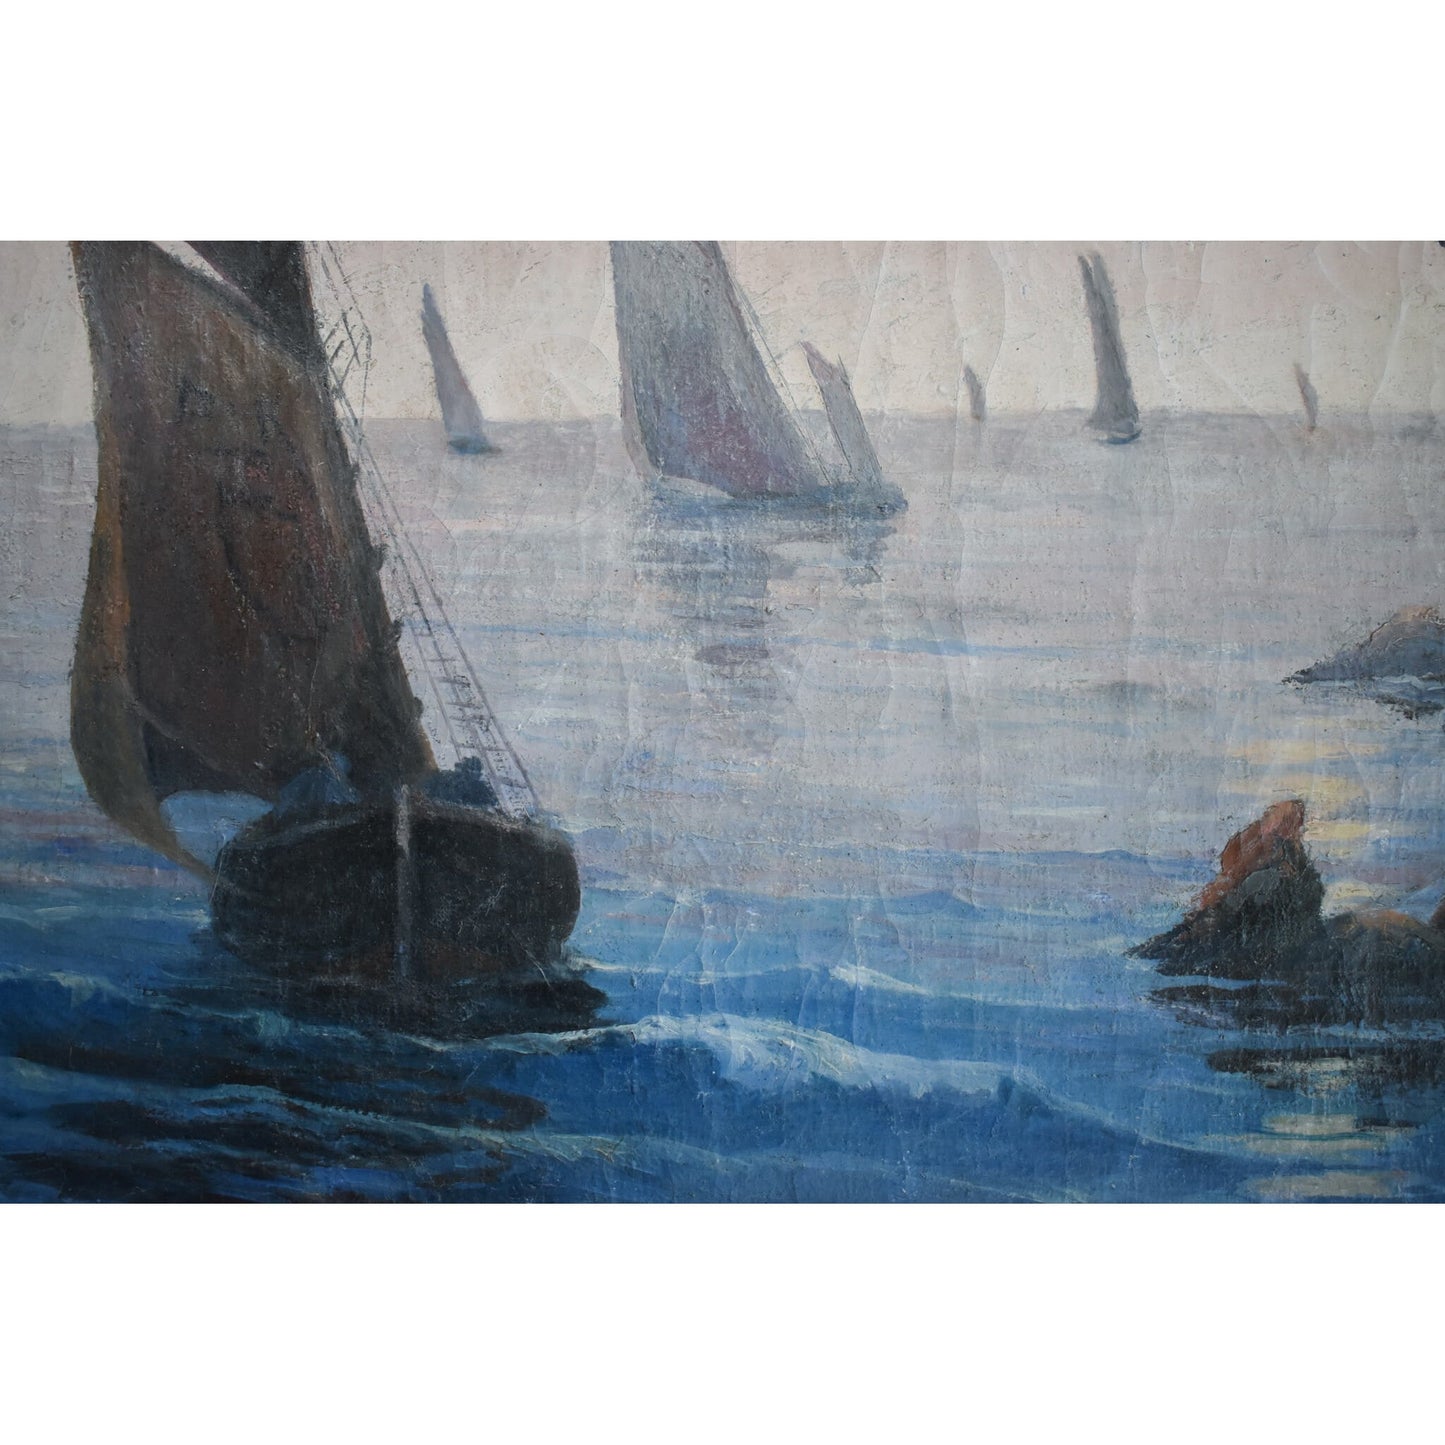 Vintage oil painting, rocky coastal landscape with sailing boats circa 1930, by René Lacaze, for sale at Winckelmann Gallery